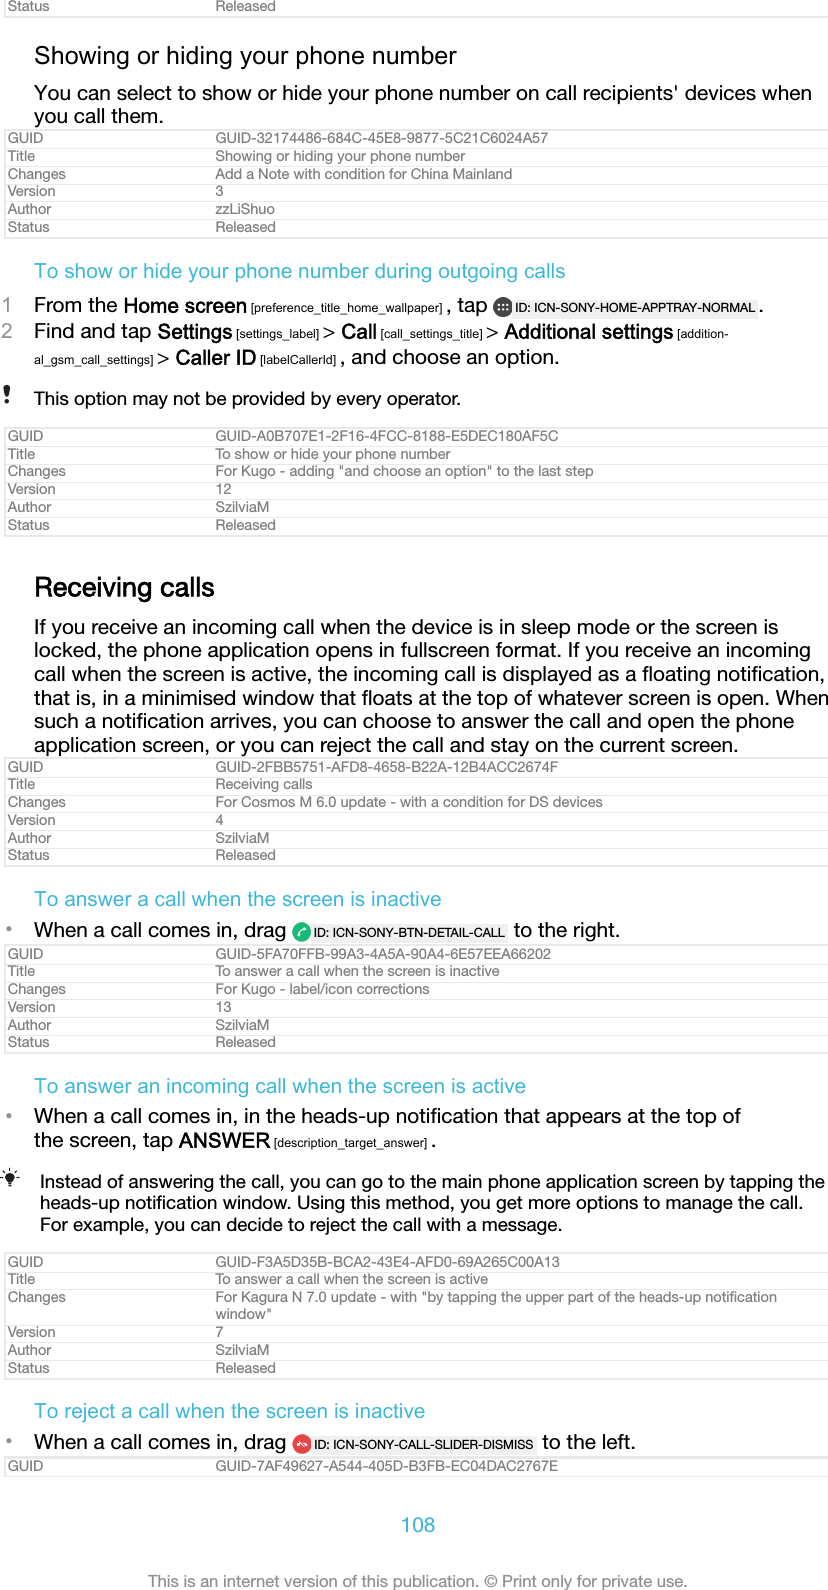 Status ReleasedShowing or hiding your phone numberYou can select to show or hide your phone number on call recipients&apos; devices whenyou call them.GUID GUID-32174486-684C-45E8-9877-5C21C6024A57Title Showing or hiding your phone numberChanges Add a Note with condition for China MainlandVersion 3Author zzLiShuoStatus ReleasedTo show or hide your phone number during outgoing calls1From the Home screen [preference_title_home_wallpaper] , tap  ID: ICN-SONY-HOME-APPTRAY-NORMAL .2Find and tap Settings [settings_label] &gt; Call [call_settings_title] &gt; Additional settings [addition-al_gsm_call_settings] &gt; Caller ID [labelCallerId] , and choose an option.This option may not be provided by every operator.GUID GUID-A0B707E1-2F16-4FCC-8188-E5DEC180AF5CTitle To show or hide your phone numberChanges For Kugo - adding &quot;and choose an option&quot; to the last stepVersion 12Author SzilviaMStatus ReleasedReceiving callsIf you receive an incoming call when the device is in sleep mode or the screen islocked, the phone application opens in fullscreen format. If you receive an incomingcall when the screen is active, the incoming call is displayed as a ﬂoating notiﬁcation,that is, in a minimised window that ﬂoats at the top of whatever screen is open. Whensuch a notiﬁcation arrives, you can choose to answer the call and open the phoneapplication screen, or you can reject the call and stay on the current screen.GUID GUID-2FBB5751-AFD8-4658-B22A-12B4ACC2674FTitle Receiving callsChanges For Cosmos M 6.0 update - with a condition for DS devicesVersion 4Author SzilviaMStatus ReleasedTo answer a call when the screen is inactive•When a call comes in, drag  ID: ICN-SONY-BTN-DETAIL-CALL  to the right.GUID GUID-5FA70FFB-99A3-4A5A-90A4-6E57EEA66202Title To answer a call when the screen is inactiveChanges For Kugo - label/icon correctionsVersion 13Author SzilviaMStatus ReleasedTo answer an incoming call when the screen is active•When a call comes in, in the heads-up notiﬁcation that appears at the top ofthe screen, tap ANSWER [description_target_answer] .Instead of answering the call, you can go to the main phone application screen by tapping theheads-up notiﬁcation window. Using this method, you get more options to manage the call.For example, you can decide to reject the call with a message.GUID GUID-F3A5D35B-BCA2-43E4-AFD0-69A265C00A13Title To answer a call when the screen is activeChanges For Kagura N 7.0 update - with &quot;by tapping the upper part of the heads-up notiﬁcationwindow&quot;Version 7Author SzilviaMStatus ReleasedTo reject a call when the screen is inactive•When a call comes in, drag  ID: ICN-SONY-CALL-SLIDER-DISMISS  to the left.GUID GUID-7AF49627-A544-405D-B3FB-EC04DAC2767E108This is an internet version of this publication. © Print only for private use.